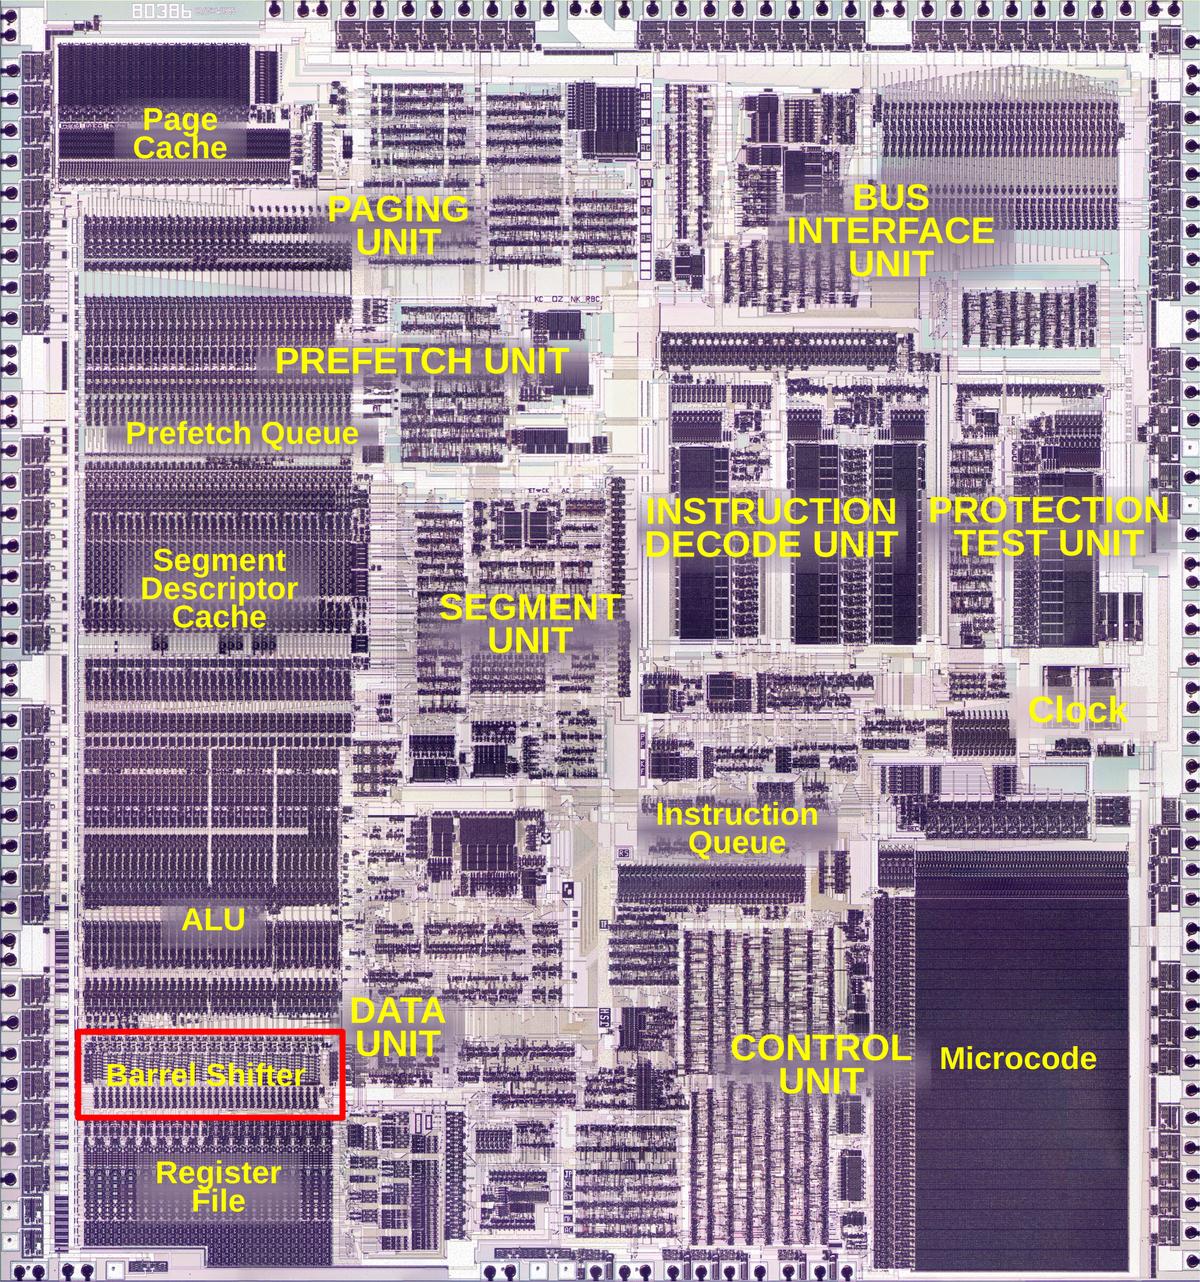 The 386 die with the main functional blocks labeled. Click this image (or any other) for a larger version.)